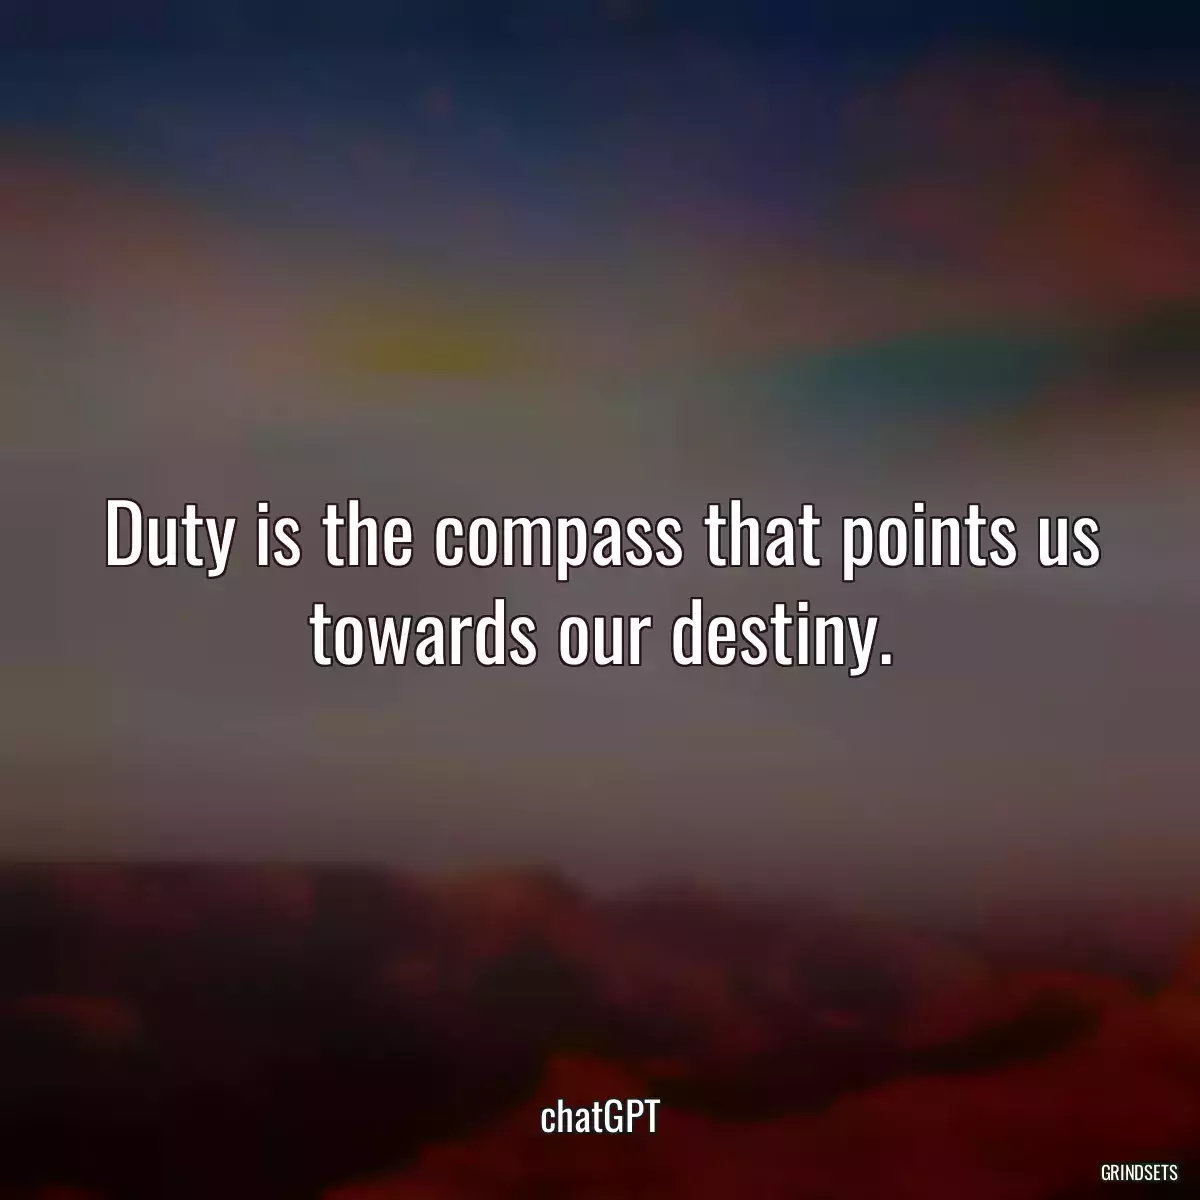 Duty is the compass that points us towards our destiny.